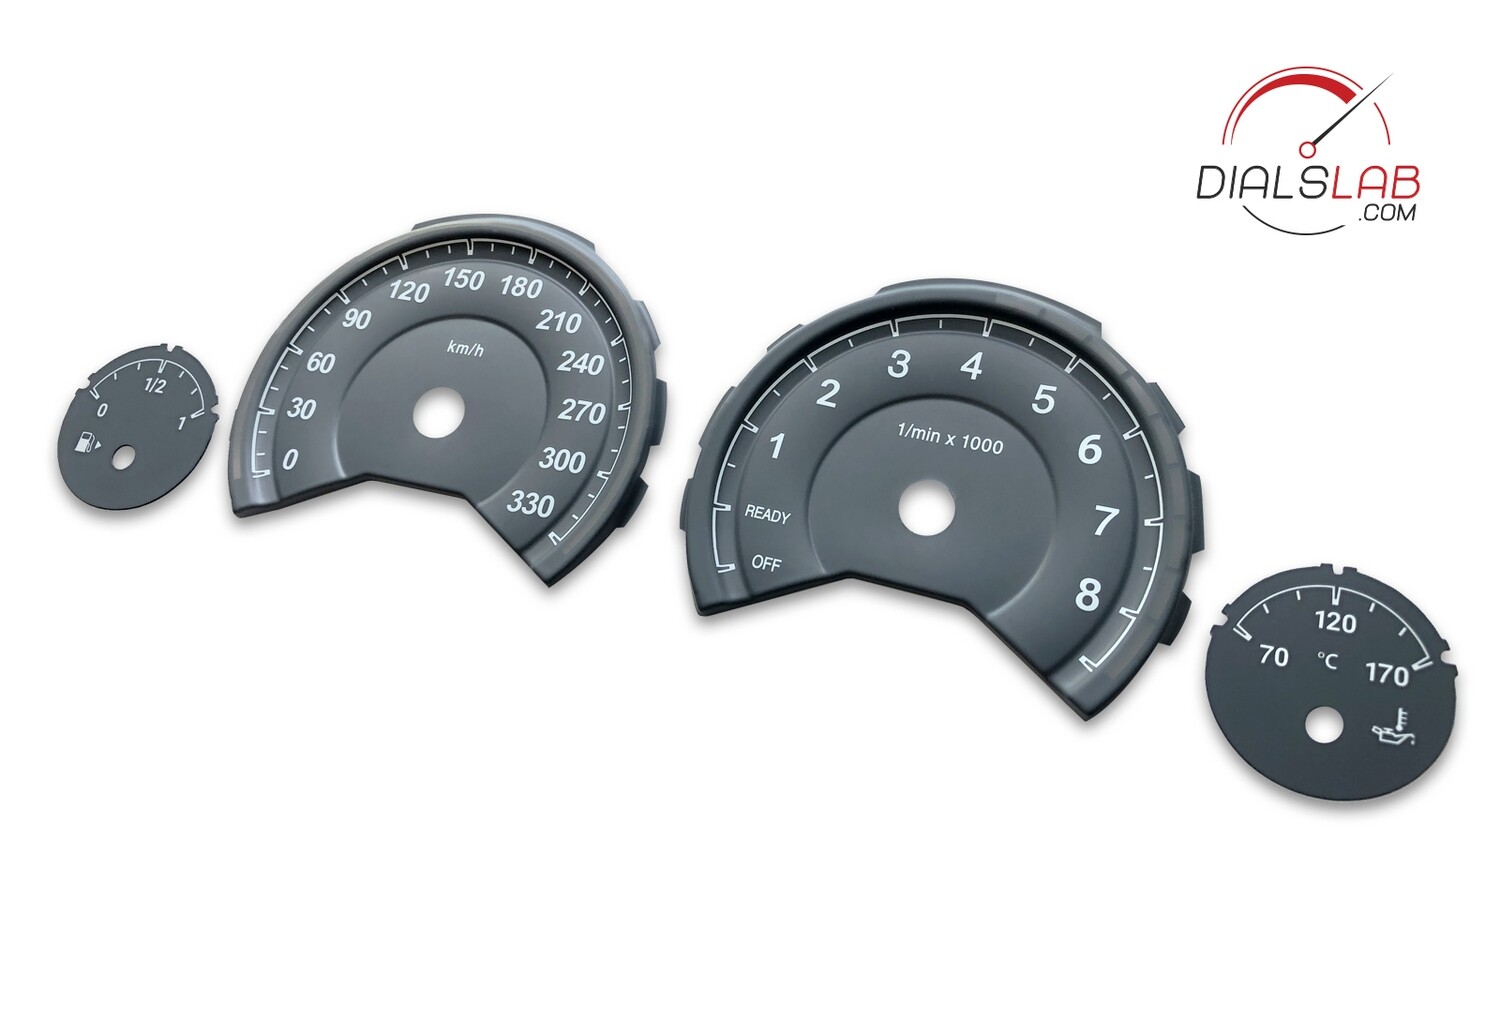 3D BMW F8x, M3, M4 dials - From MPH to km/h conversion